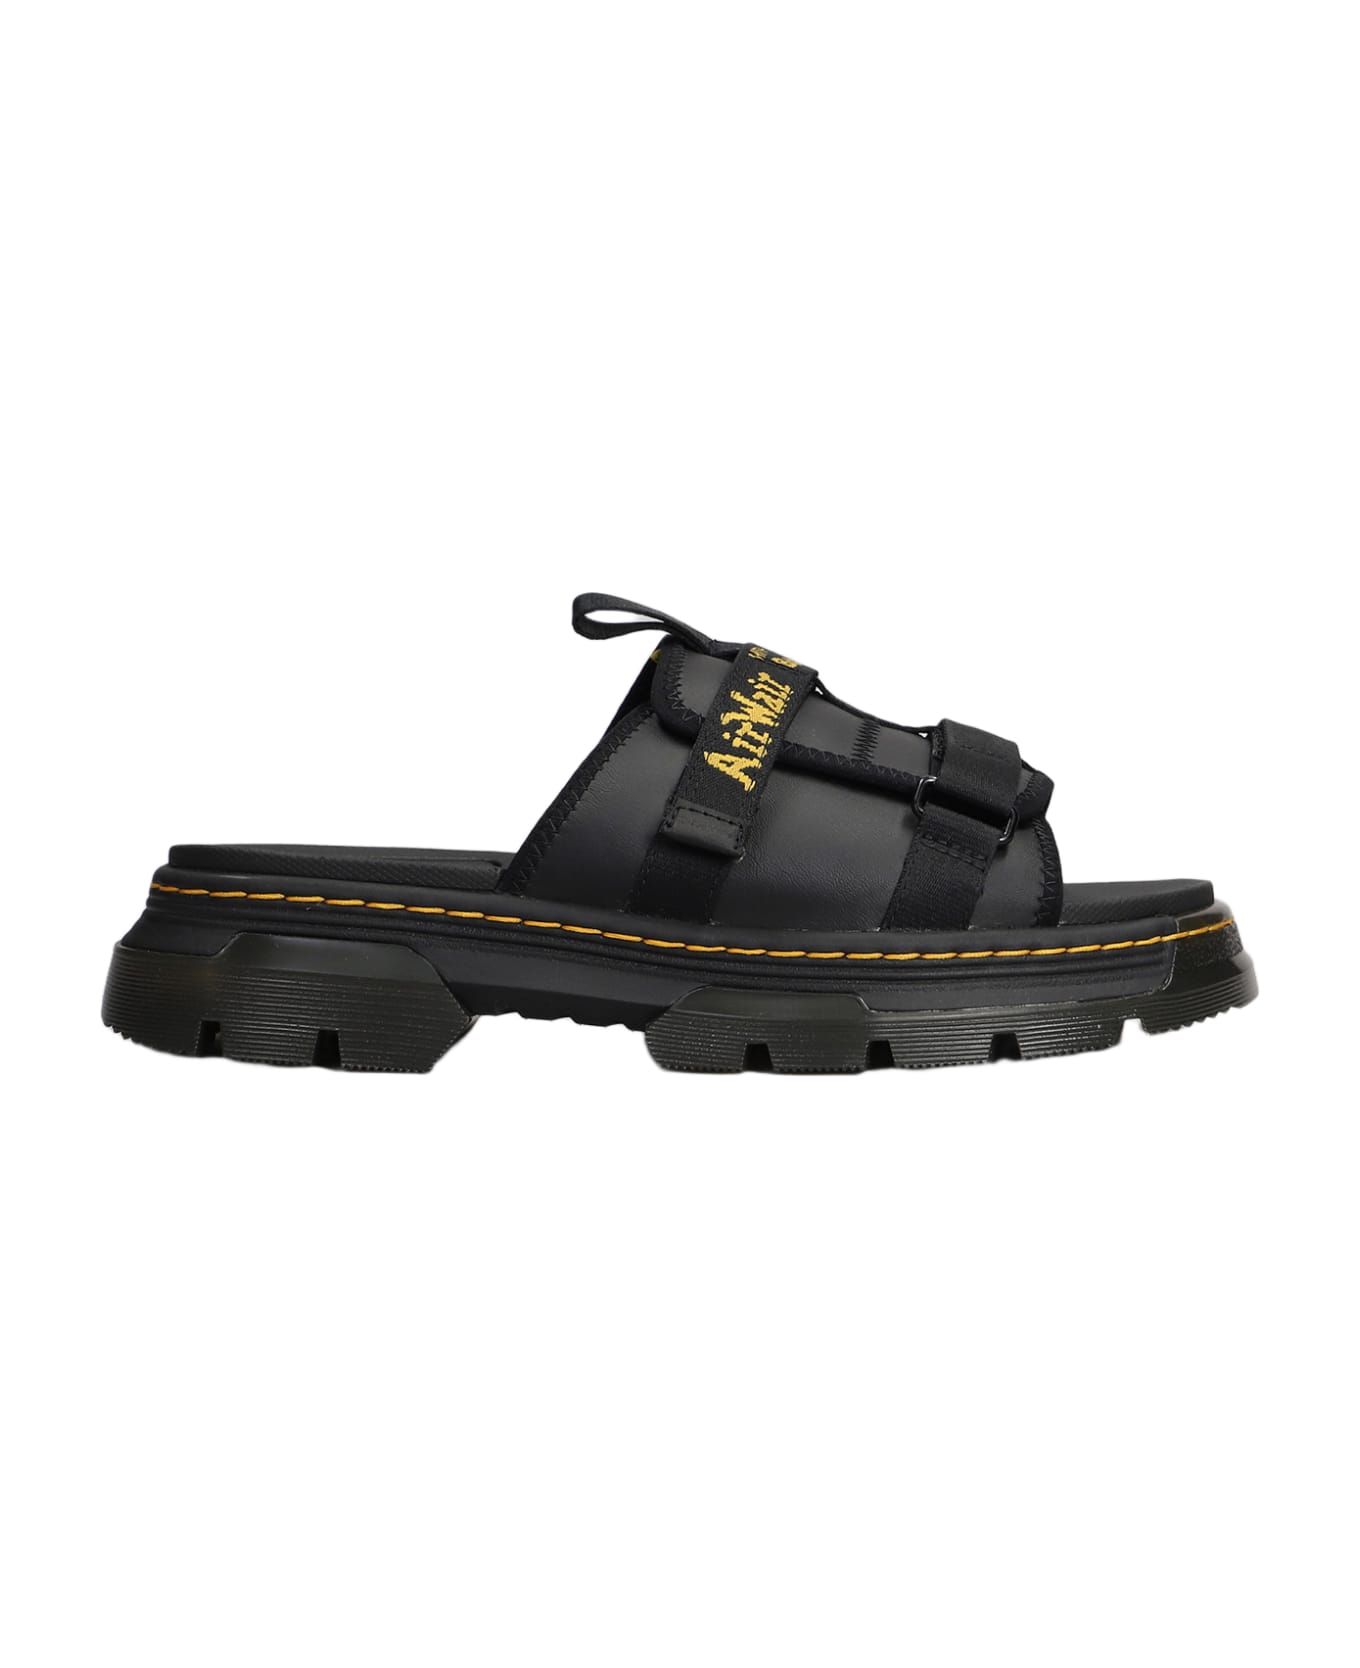 Dr. Martens Ayce Flats In Black Leather - black その他各種シューズ